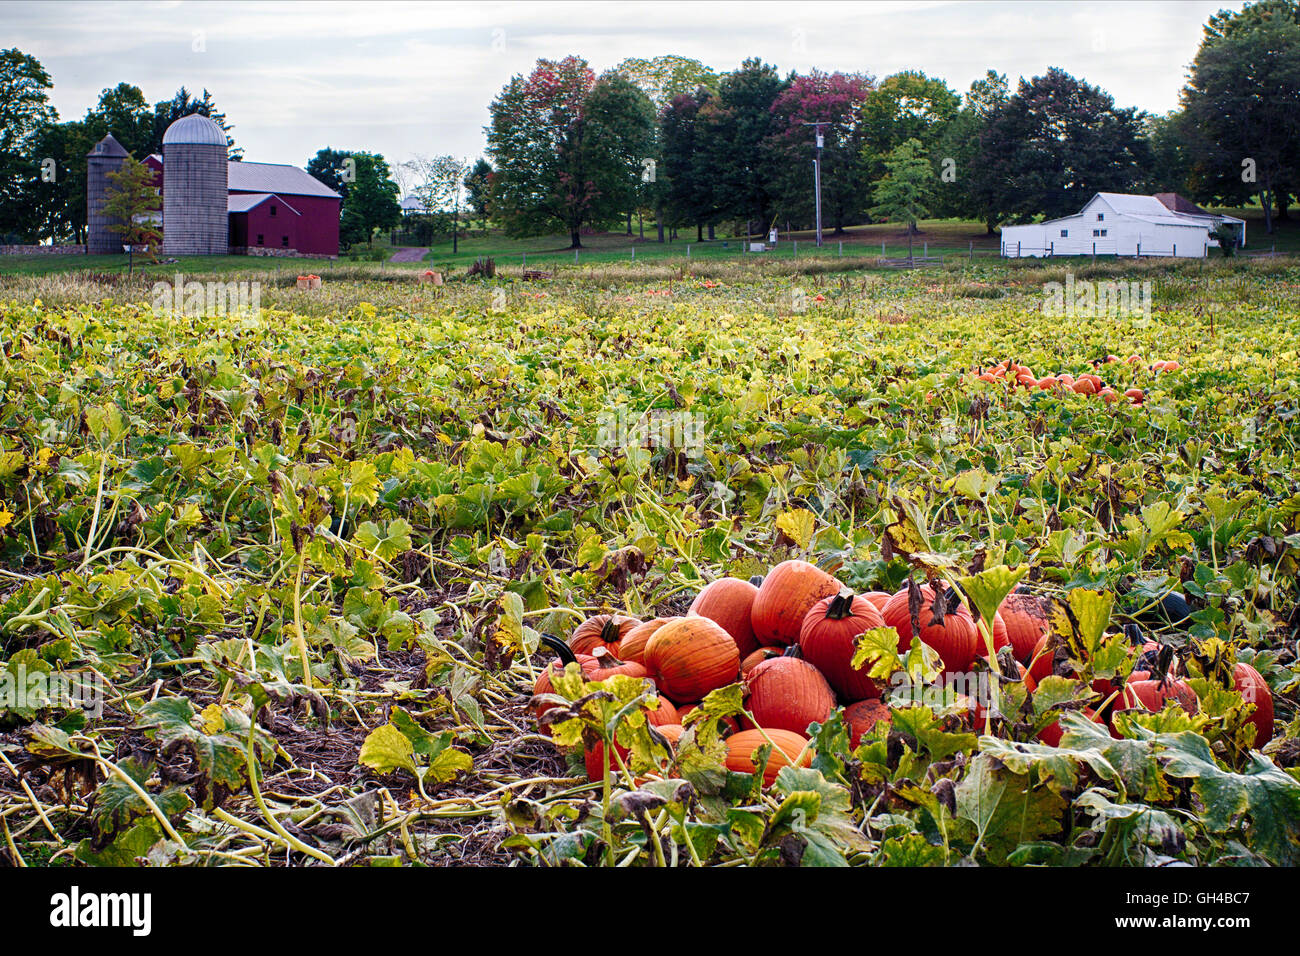 Low Angle View of a Pile of Harvested Pumpkins with a Farm Building in the Background, Oldwick, Hunterdon County, New Jetsey Stock Photo